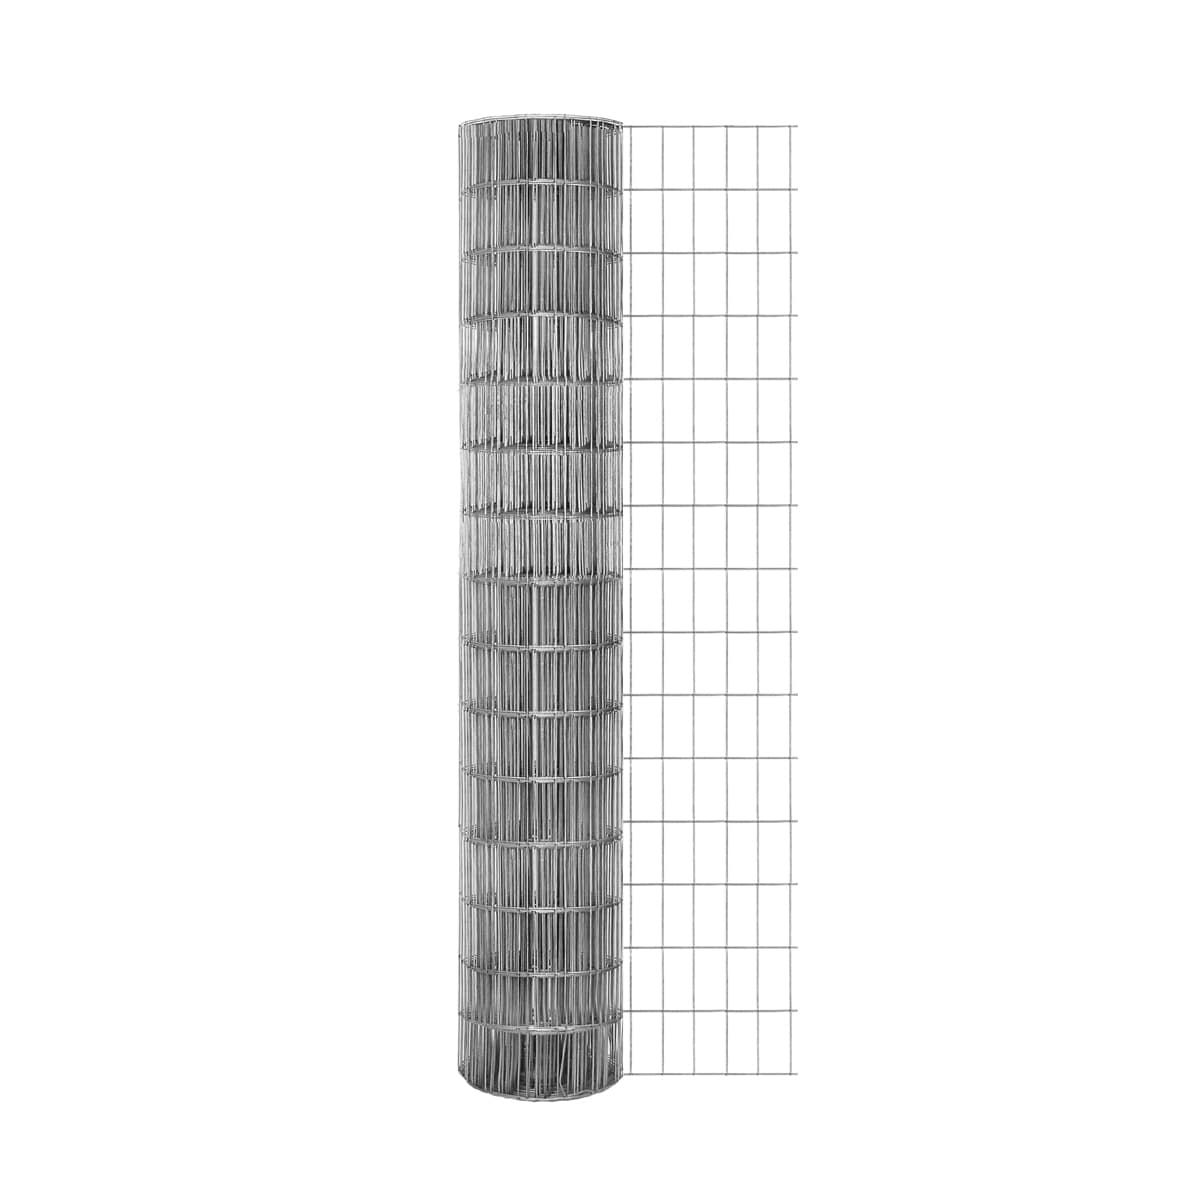 5 ft. L x 24-inch H 23-Gauge Welded Wire Galvanized Steel Netting Fence  with 1/4-inch x 1/4-inch Mesh